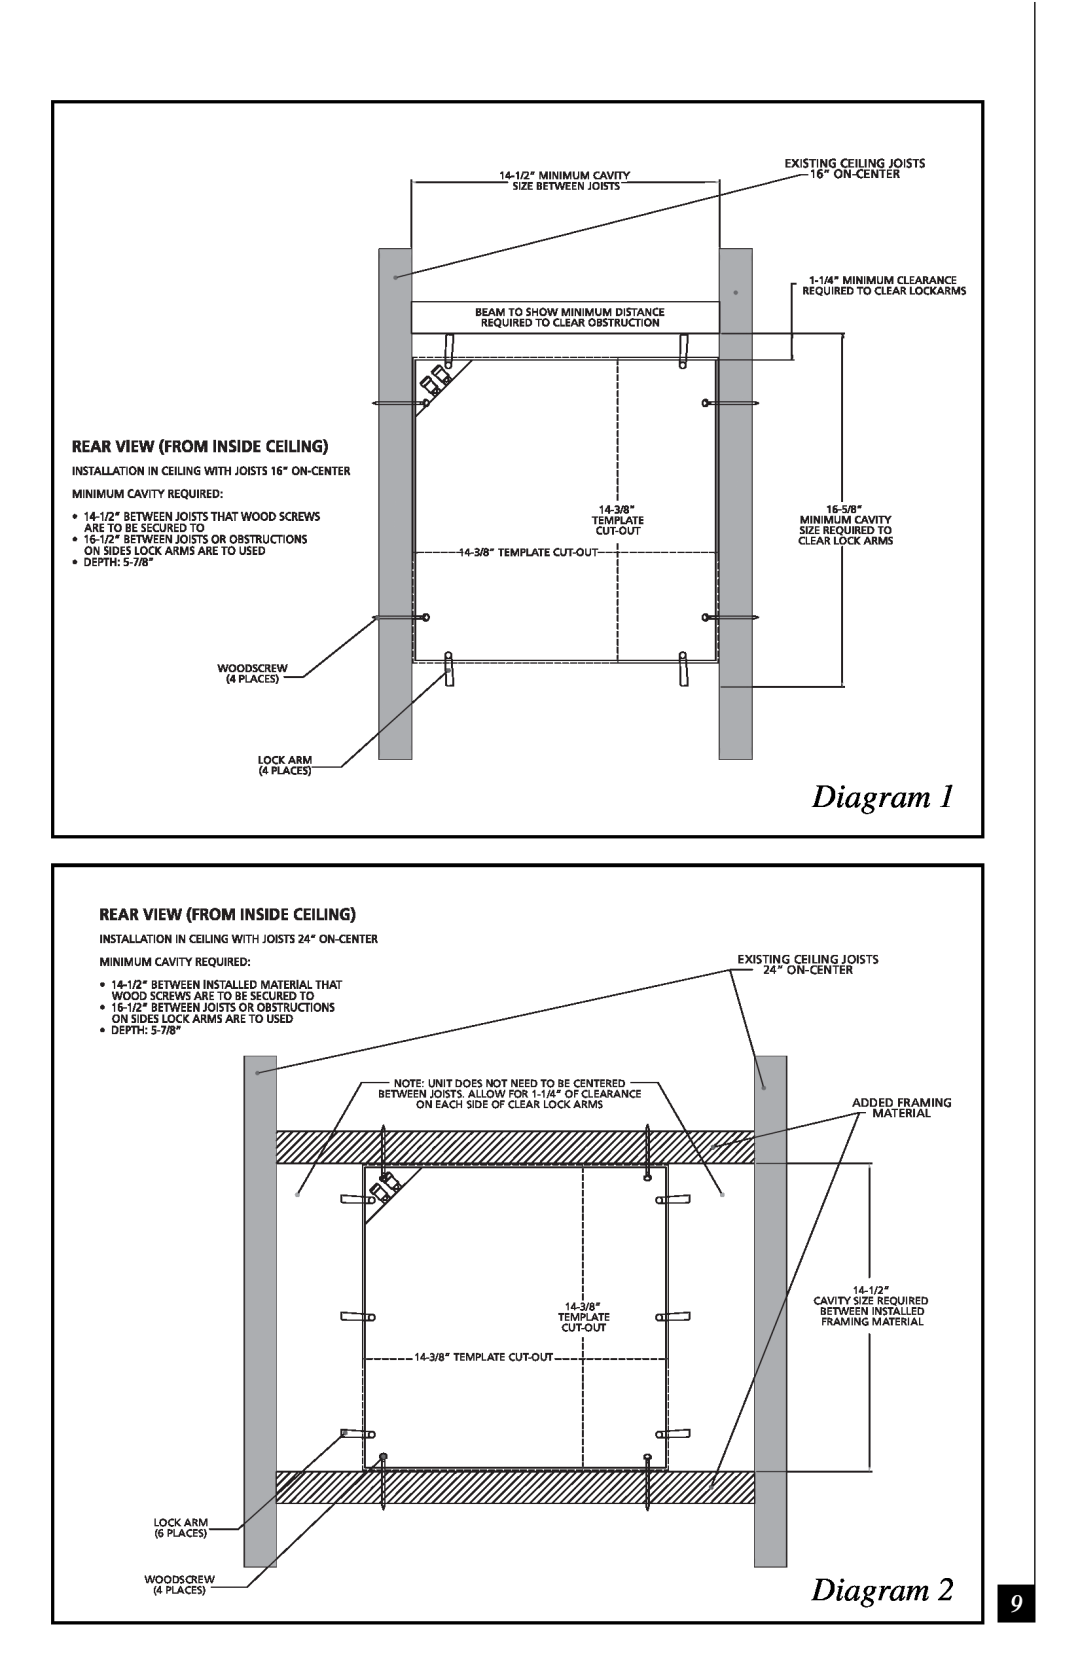 Definitive Technology UIW RCS II owner manual Diagram 